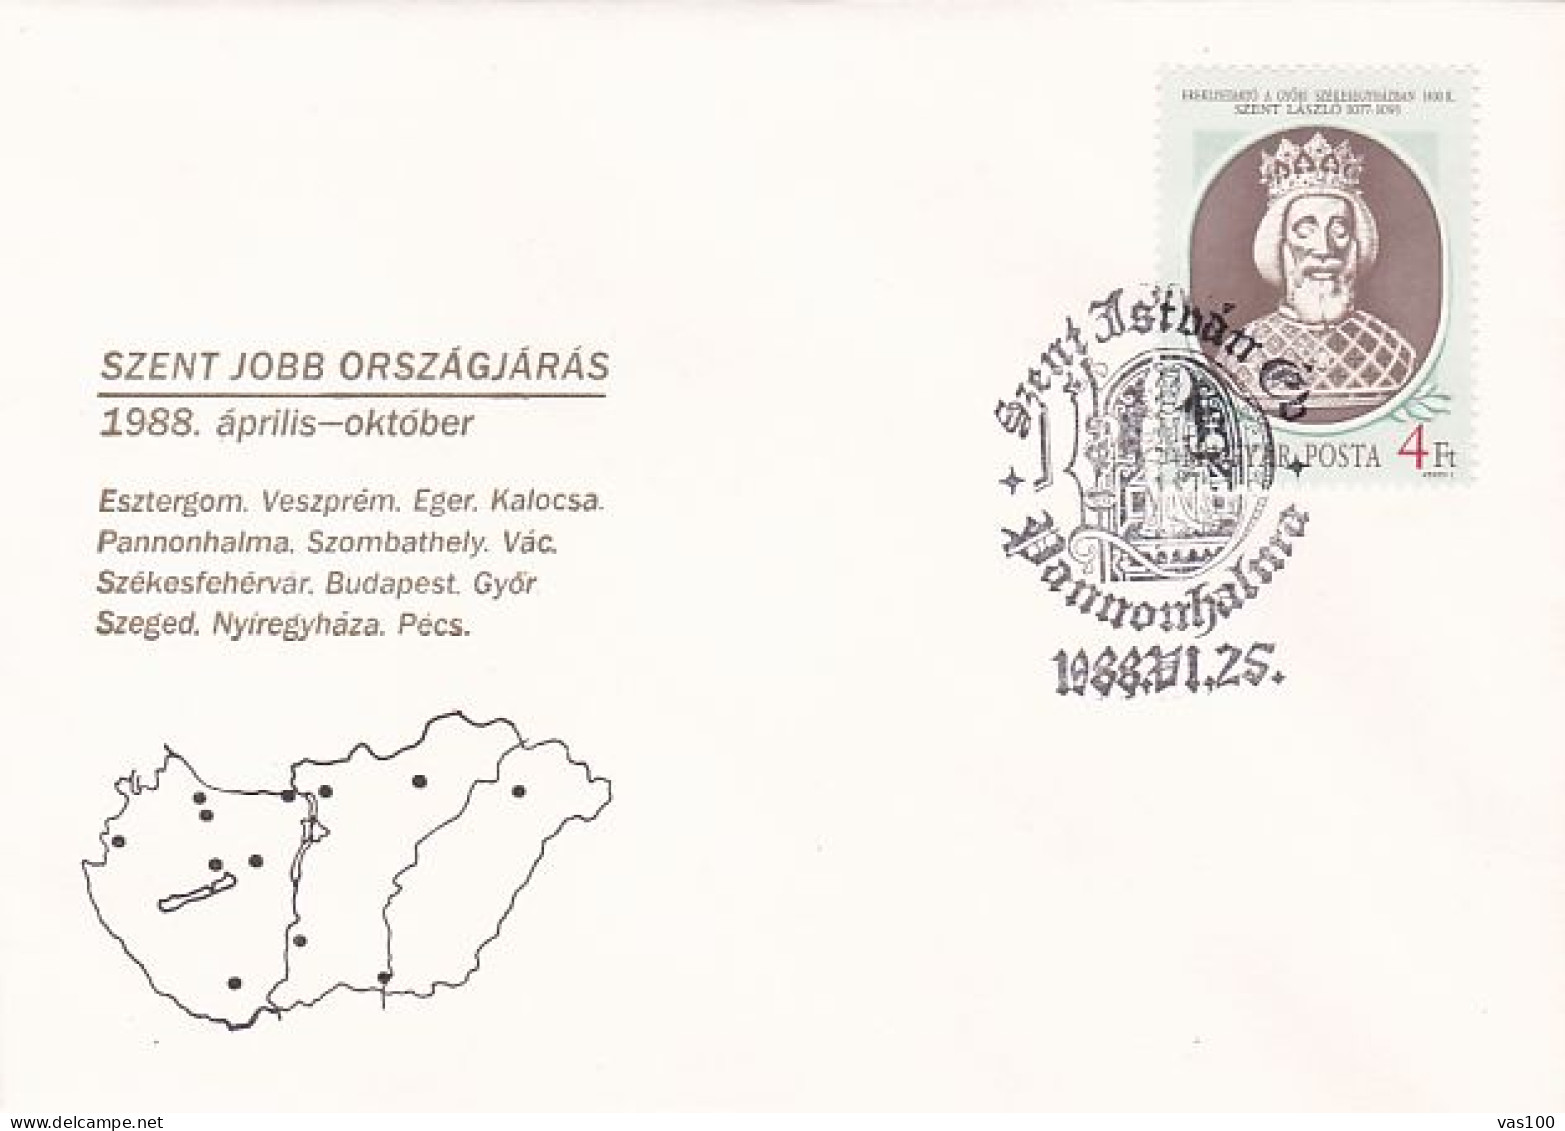 ST STEPHEN ROUTE THROUGH PANNONIAN PLAIN, MAP, SPECIAL COVER, 1988, HUNGARY - Briefe U. Dokumente